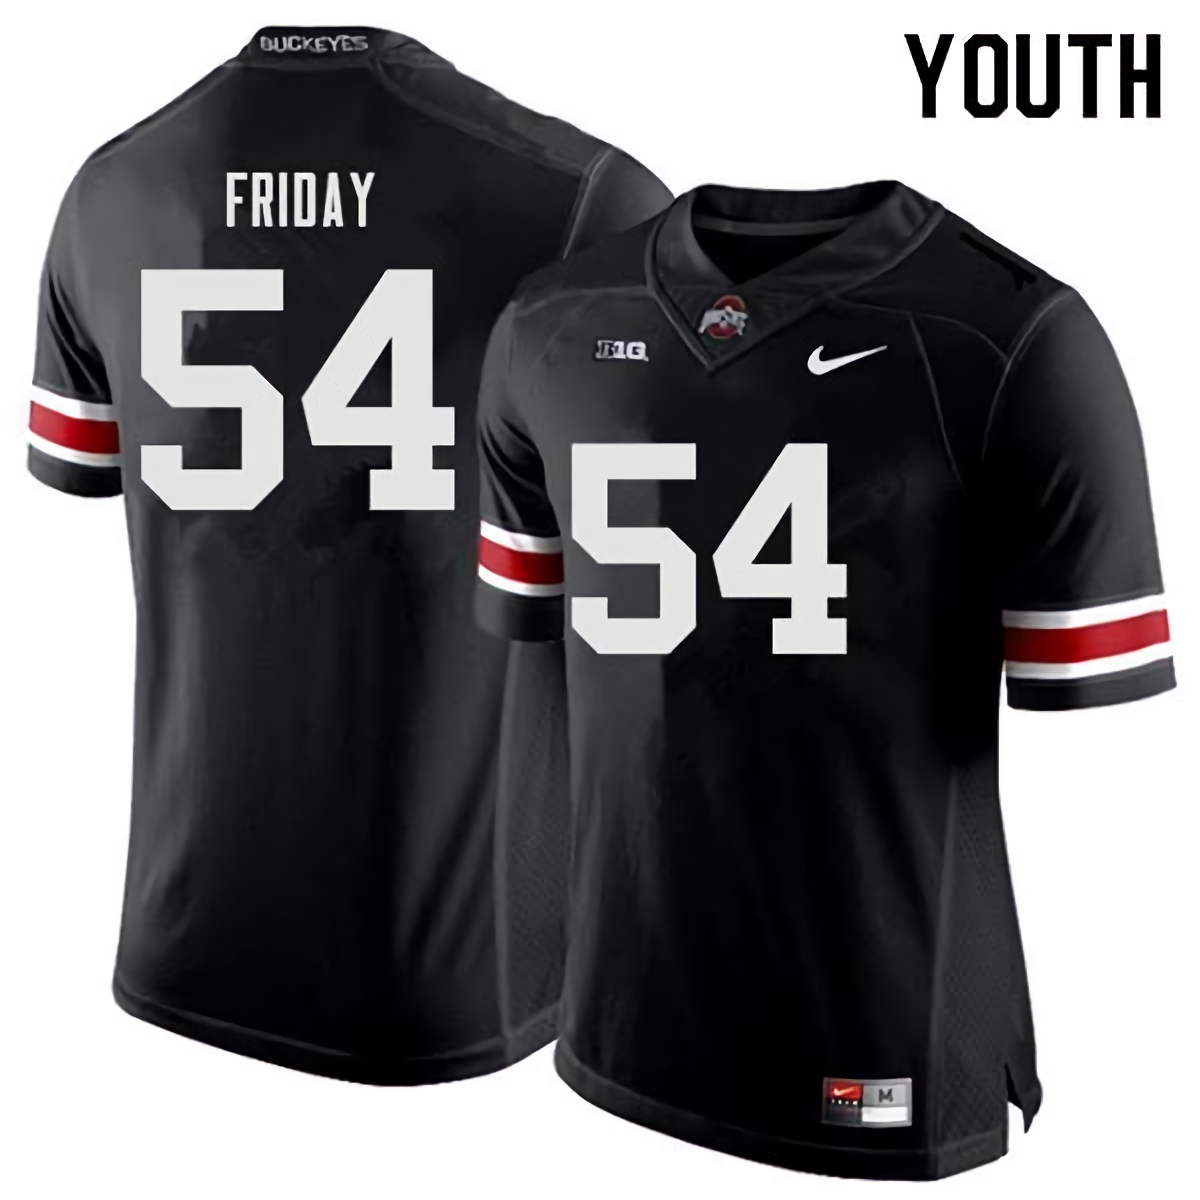 Tyler Friday Ohio State Buckeyes Youth NCAA #54 Nike Black College Stitched Football Jersey HDN1756ZT